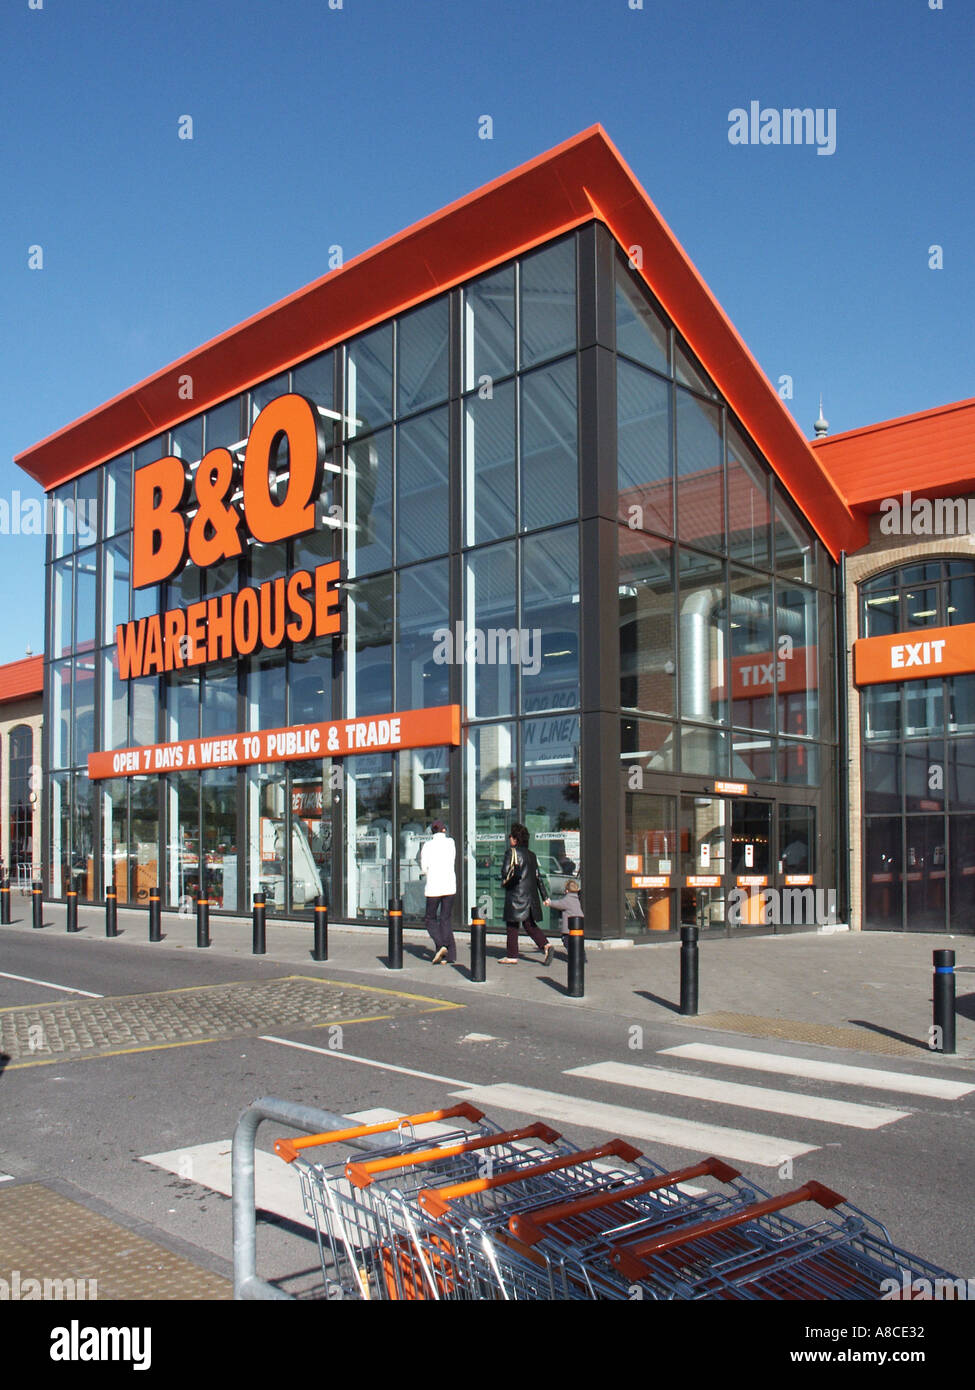 Chelmsford B&Q diy business retail store warehouse building with glass  cladding to main entrance & exit area to car park Chelmsford Essex England  uk Stock Photo - Alamy